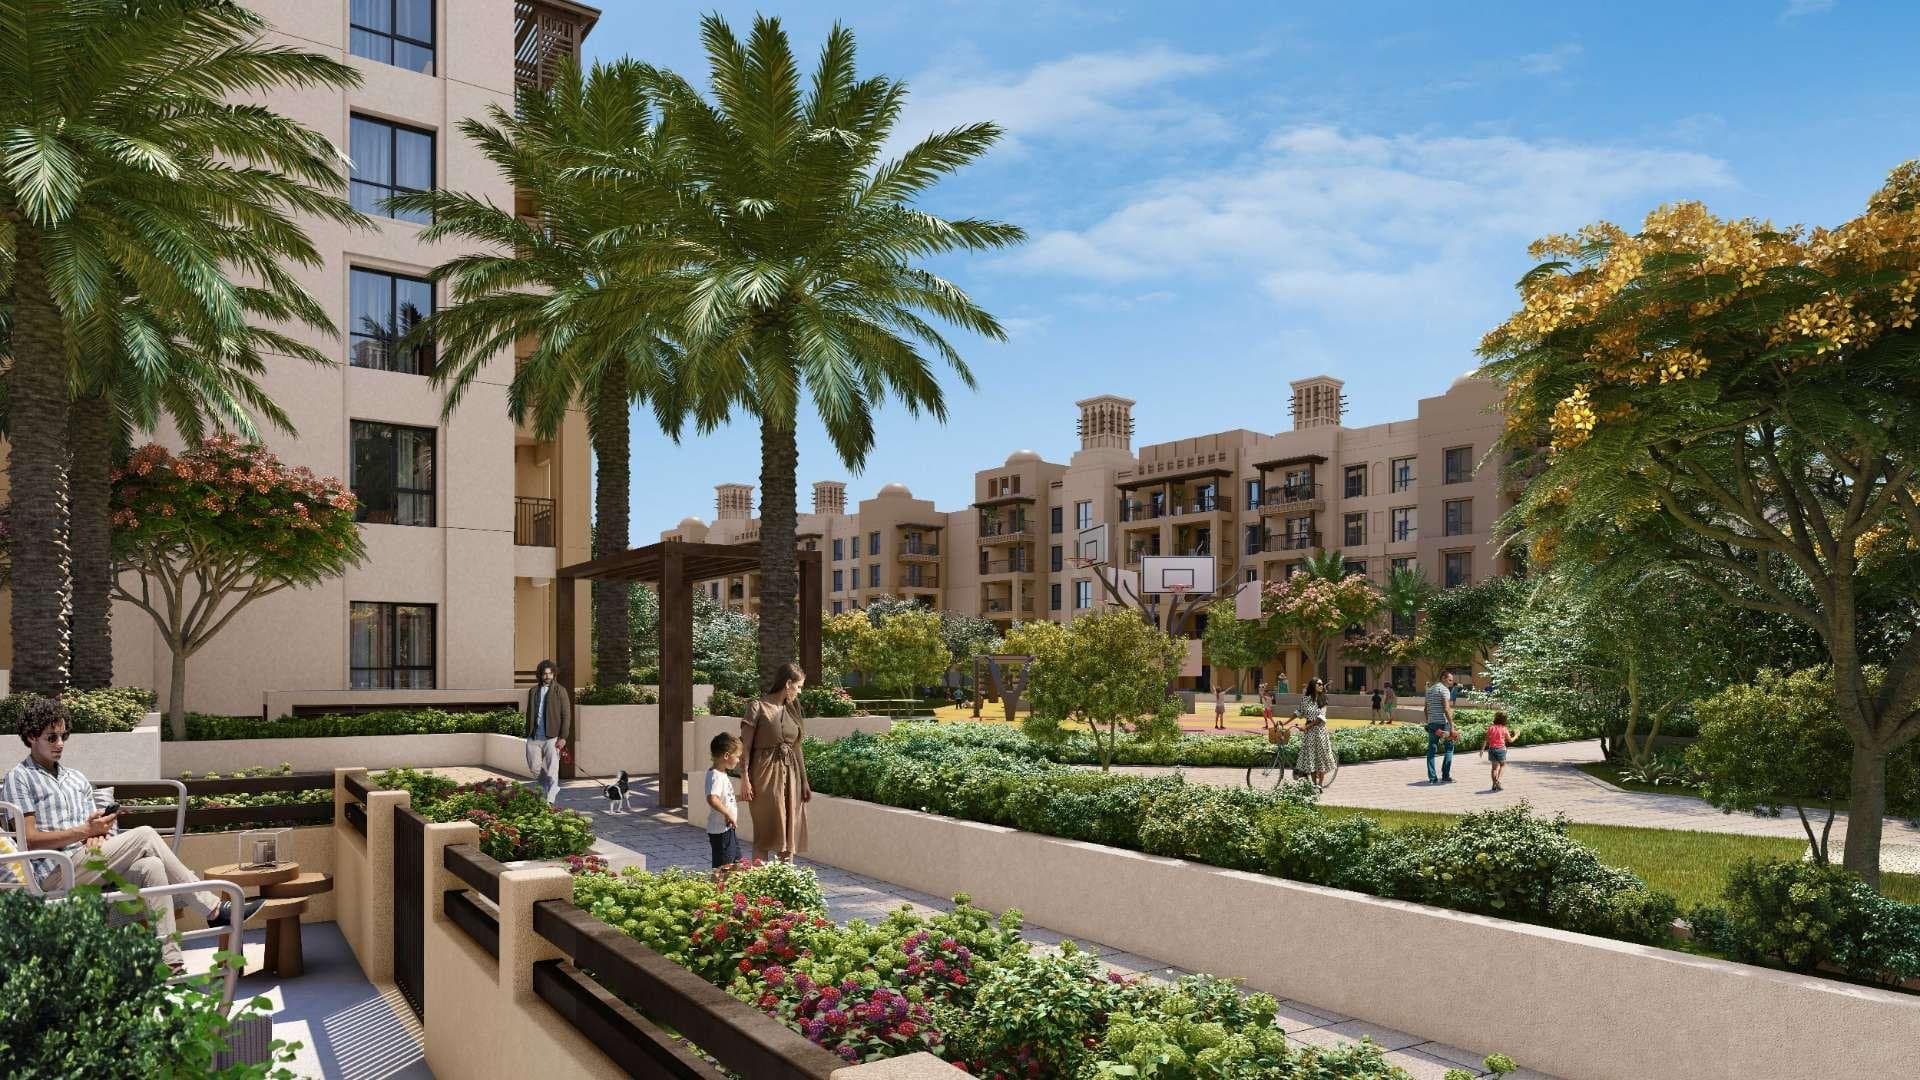 4 Bedroom Apartment For Sale Madinat Jumeirah Living Lp14980 2aef0bdace124a00.jpg